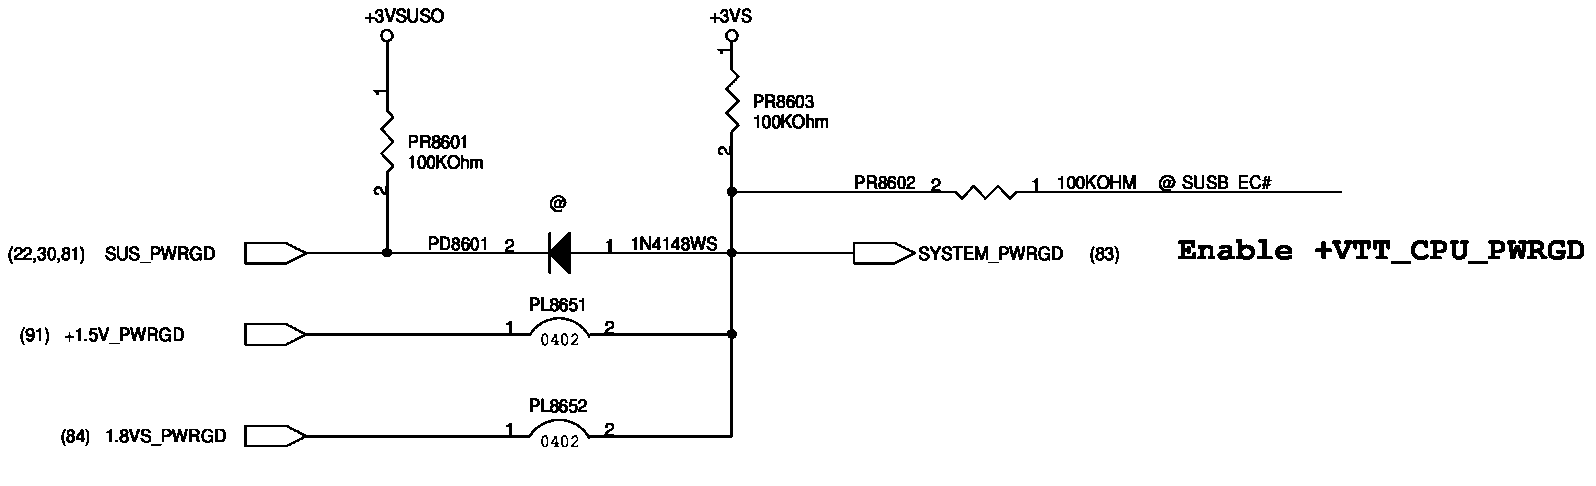 SYSTEM_PWRGD至RT8202(PU8301)